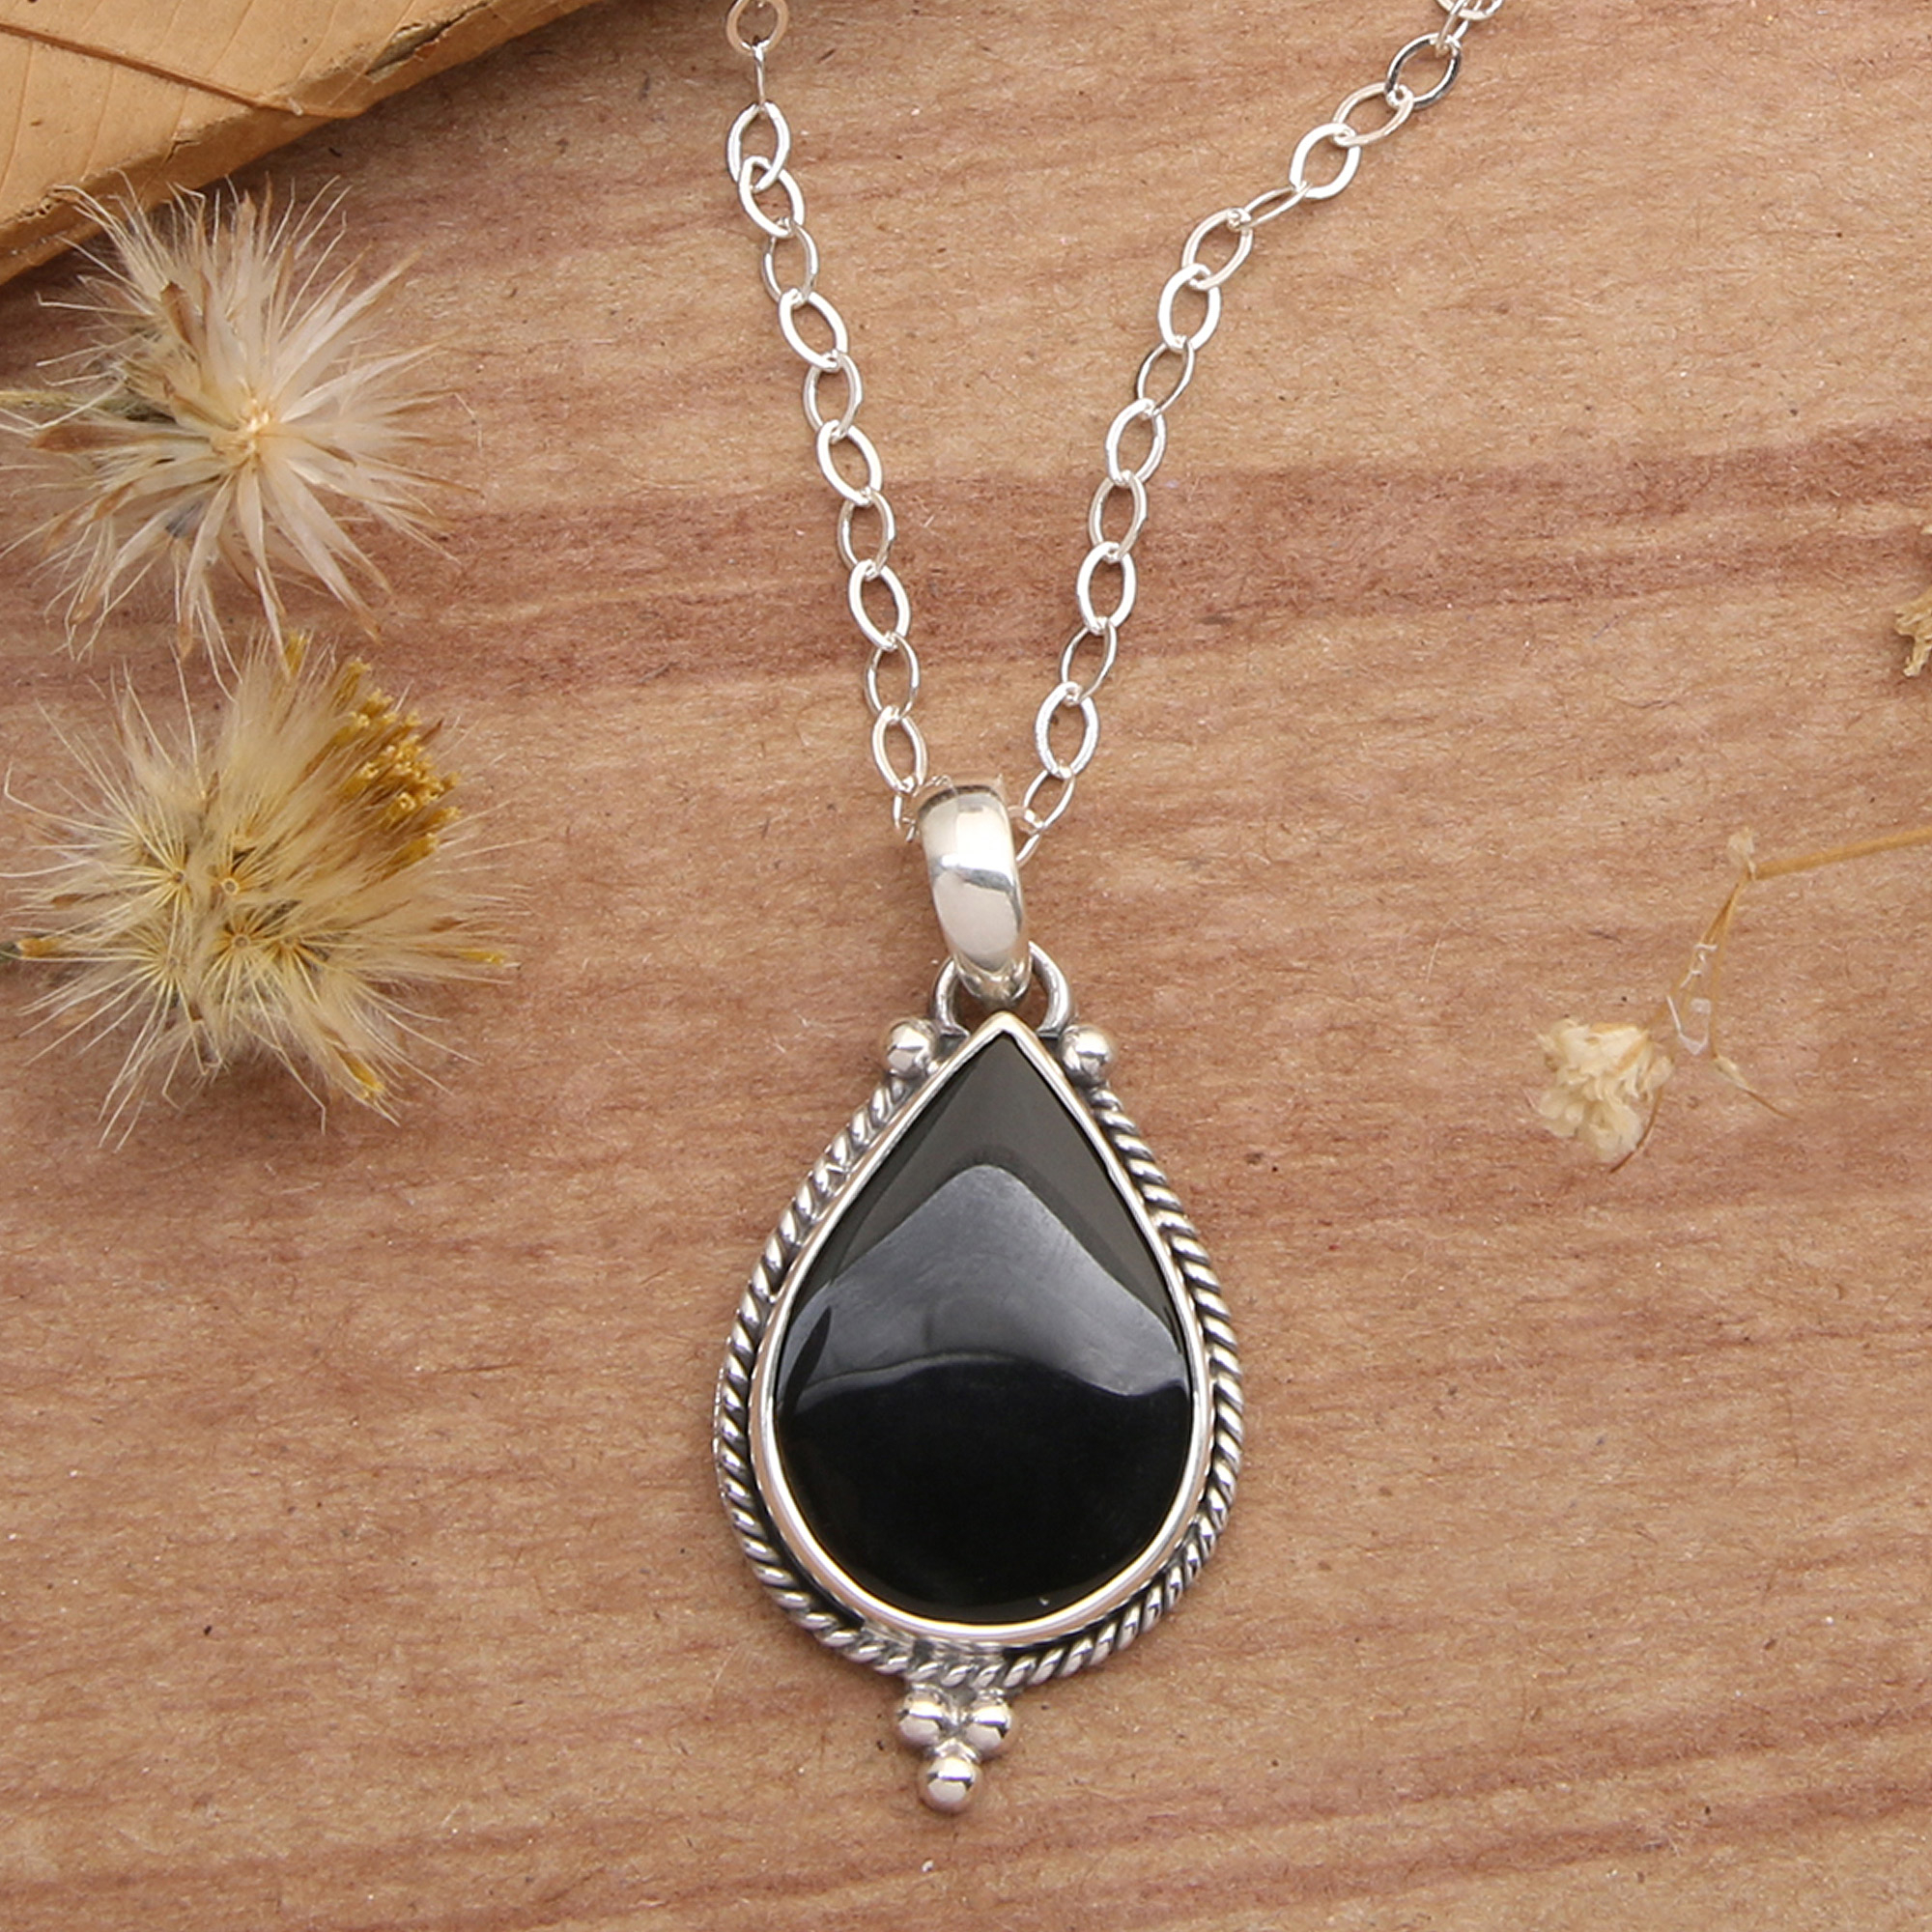 Sterling Silver Onyx Pendant Necklace with Torsade Accents, 'Tropical Night'